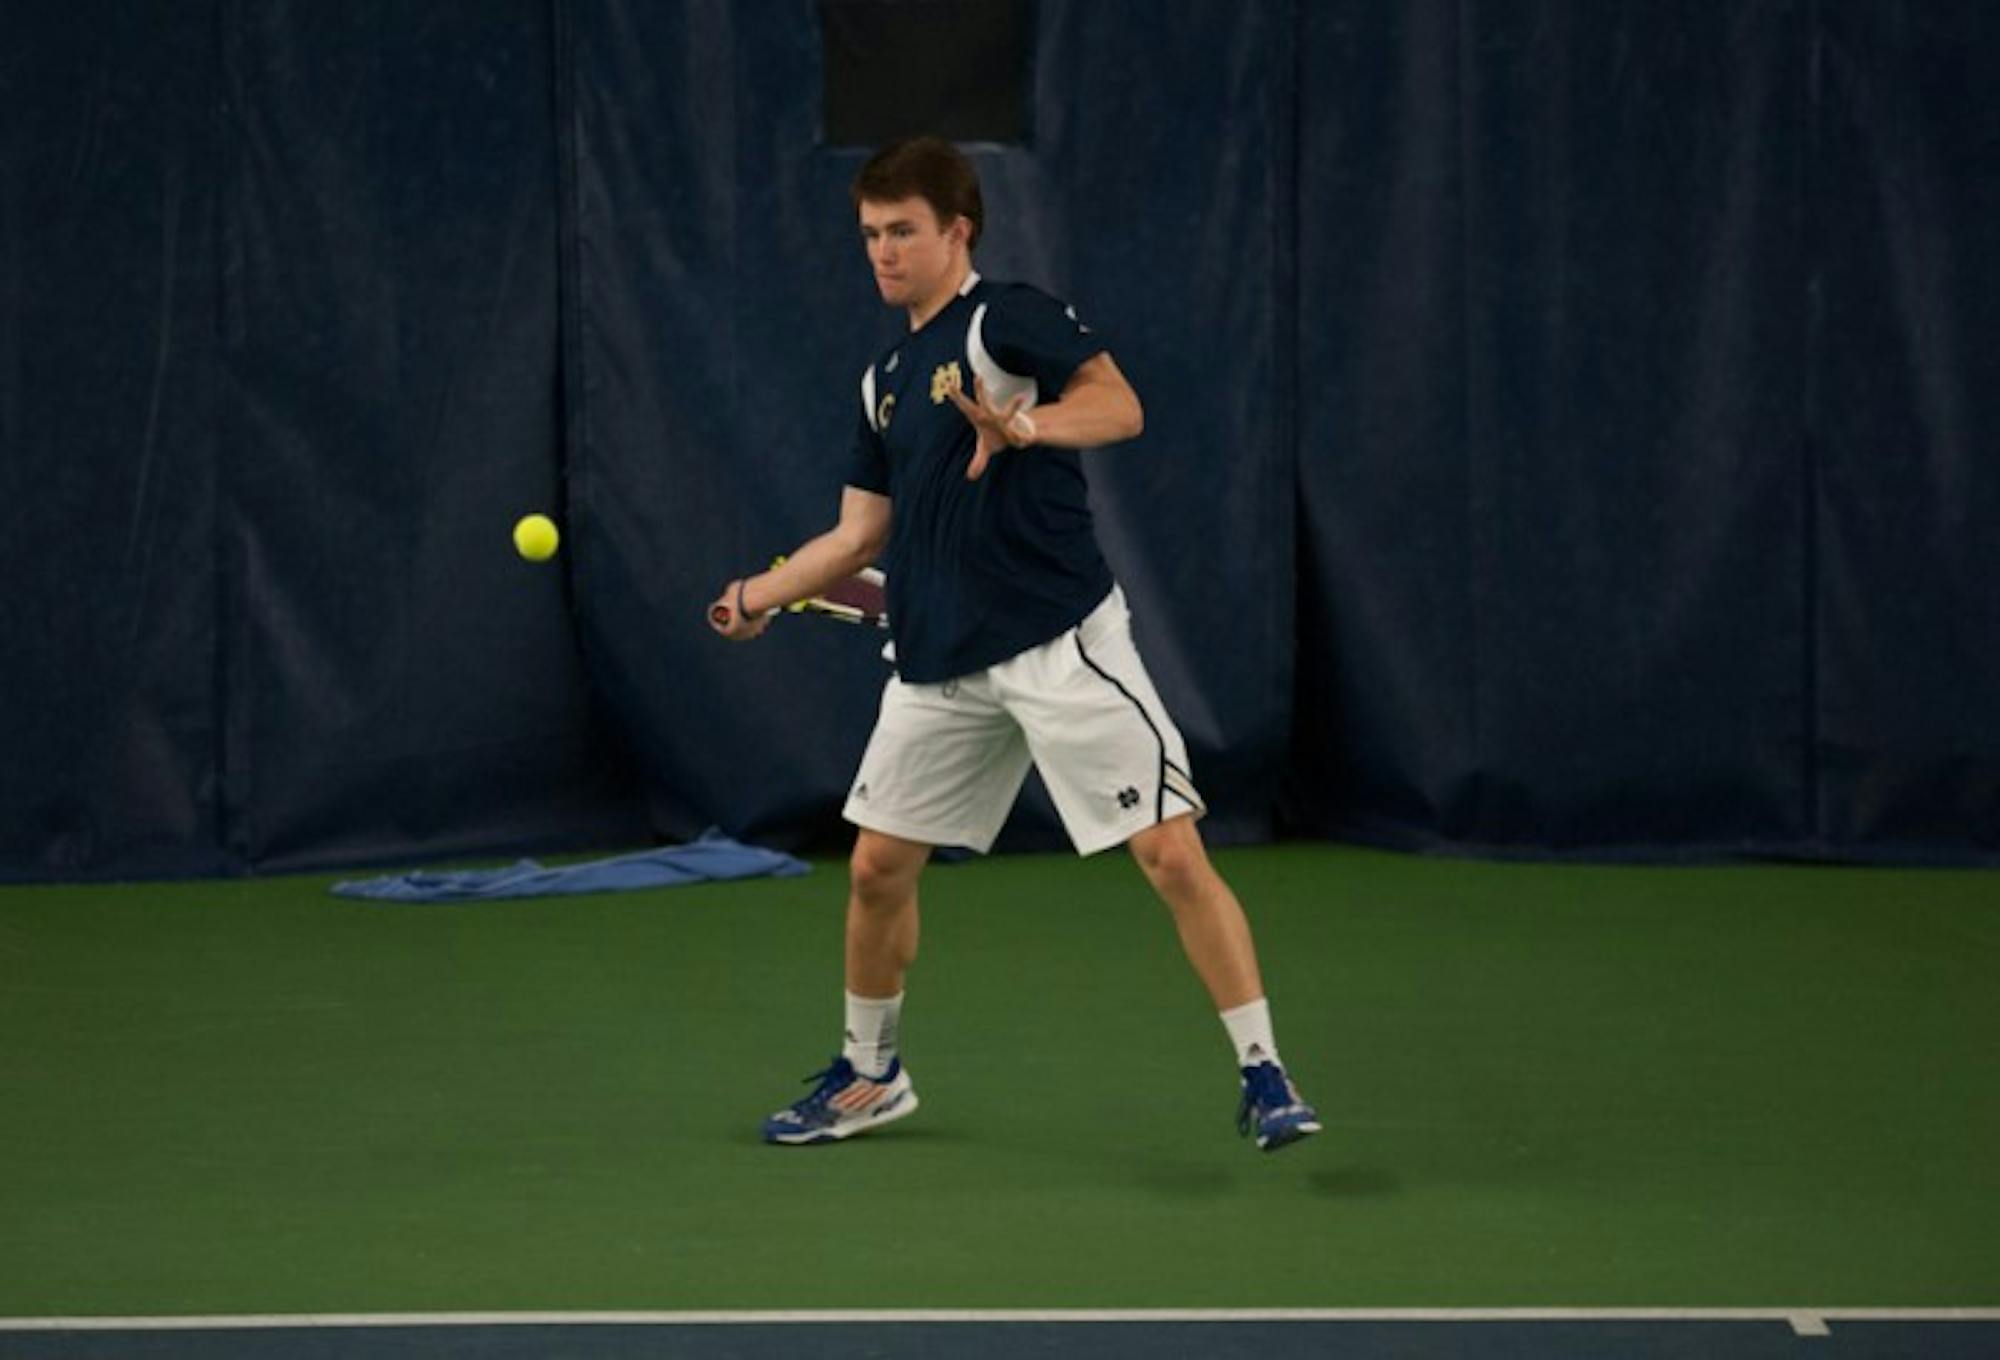 Senior Greg Andrews prepares to hit a forehand in a match against Kenturcky on Sunday. Andrews lost his singles match, but won his doubles match with sophomore Alex Lawson as the Irish defeated the Wildcats 4-3.